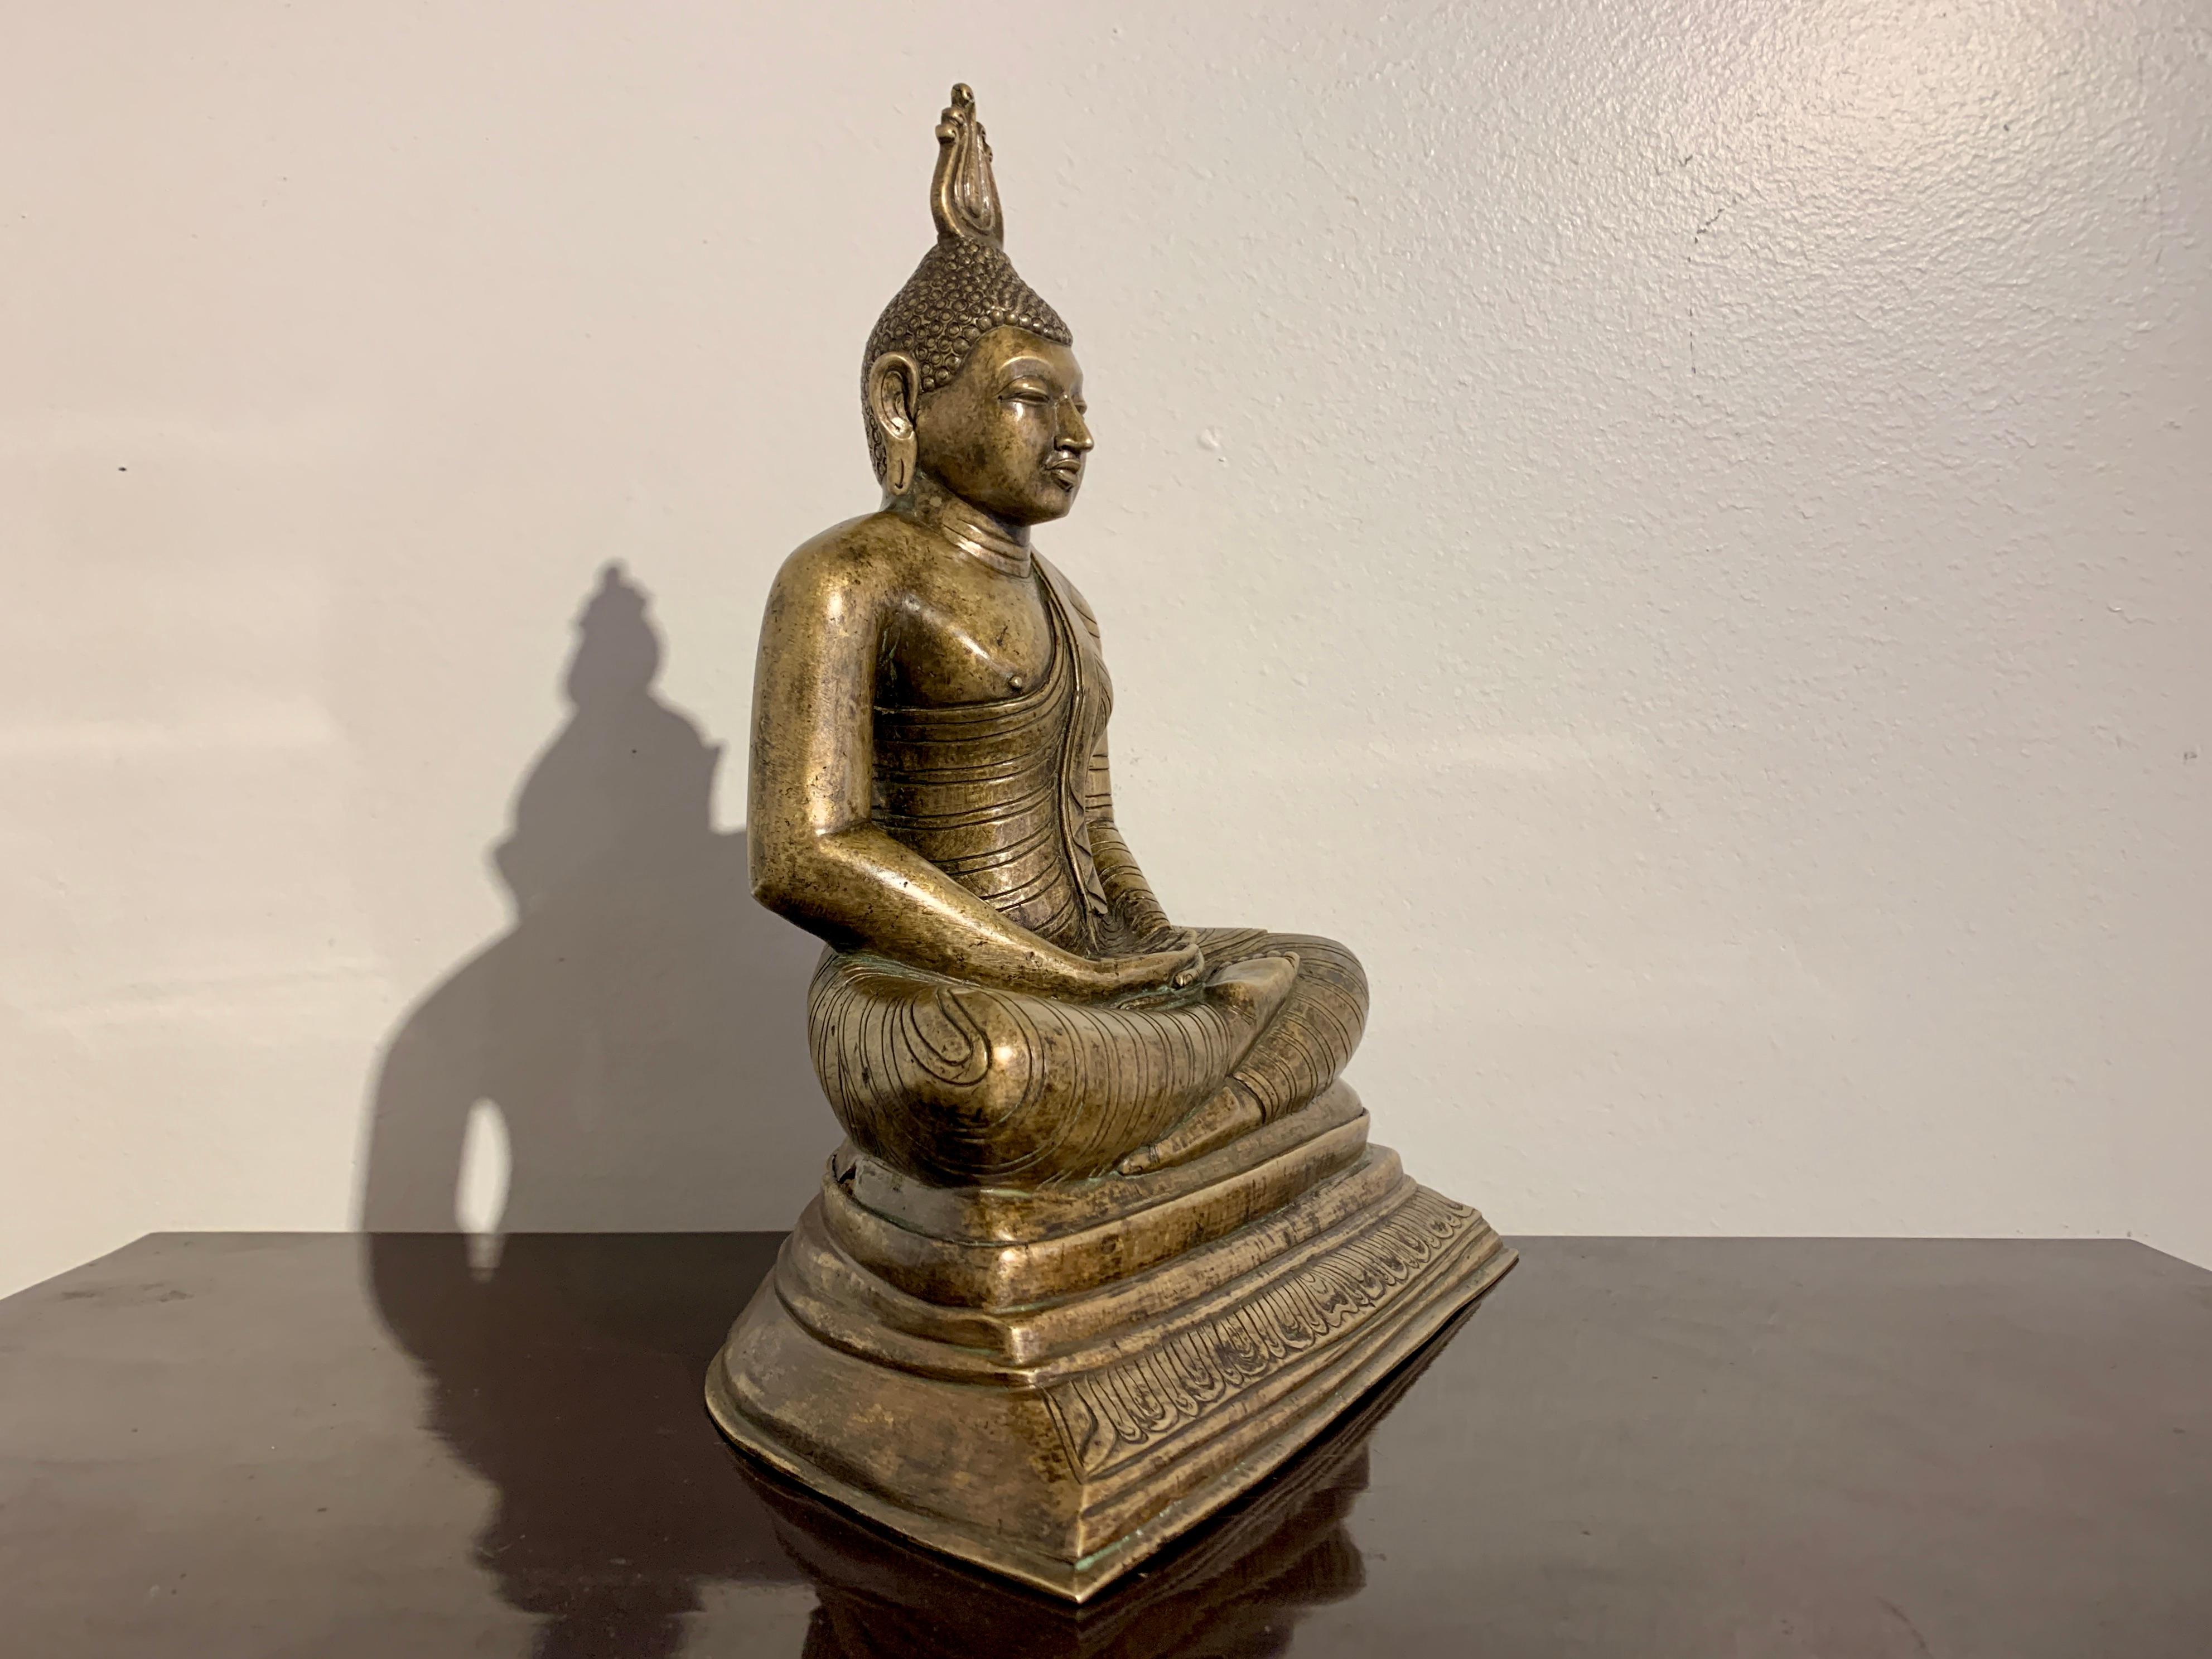 A large and heavy well cast bronze image of the Buddha seated in meditation, late or just post Kandyan period (1597 - 1815), early to mid 19th century, Sri Lanka.

The Buddha sits upon a multi-tiered trapezoidal base with a central band of